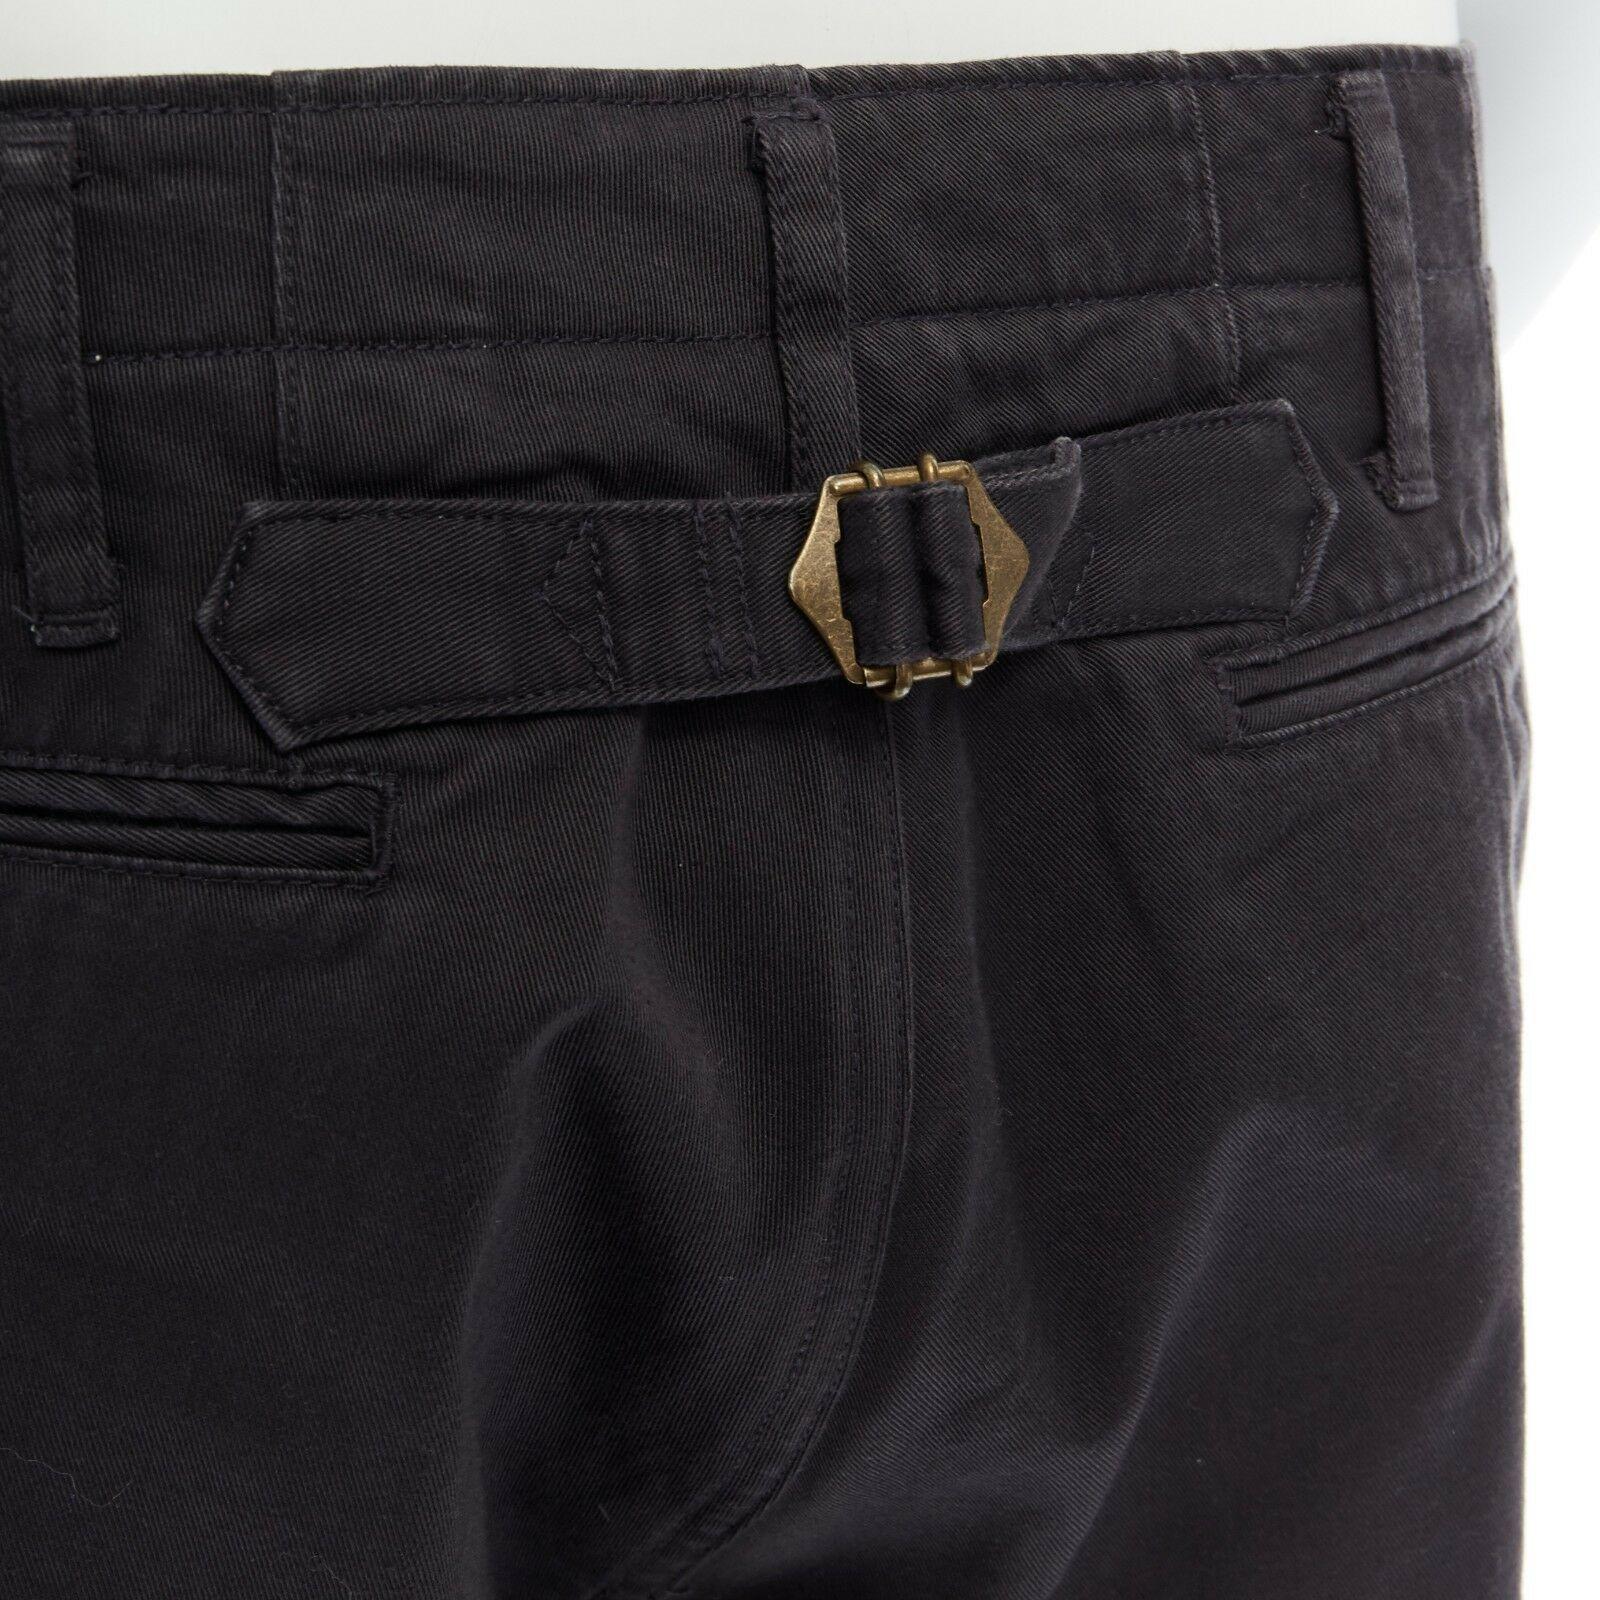 new VISVIM JAPAN 100% grey pull tab straight leg cropped pants JP2
VISVIM JAPAN
100% cotton. 
Belt loop detail. 
Button fly closure. 5-pocket design. 
Pull tab gold buckle detail at back. Mid rise. 
Straight leg. Cropped length. 
Made in